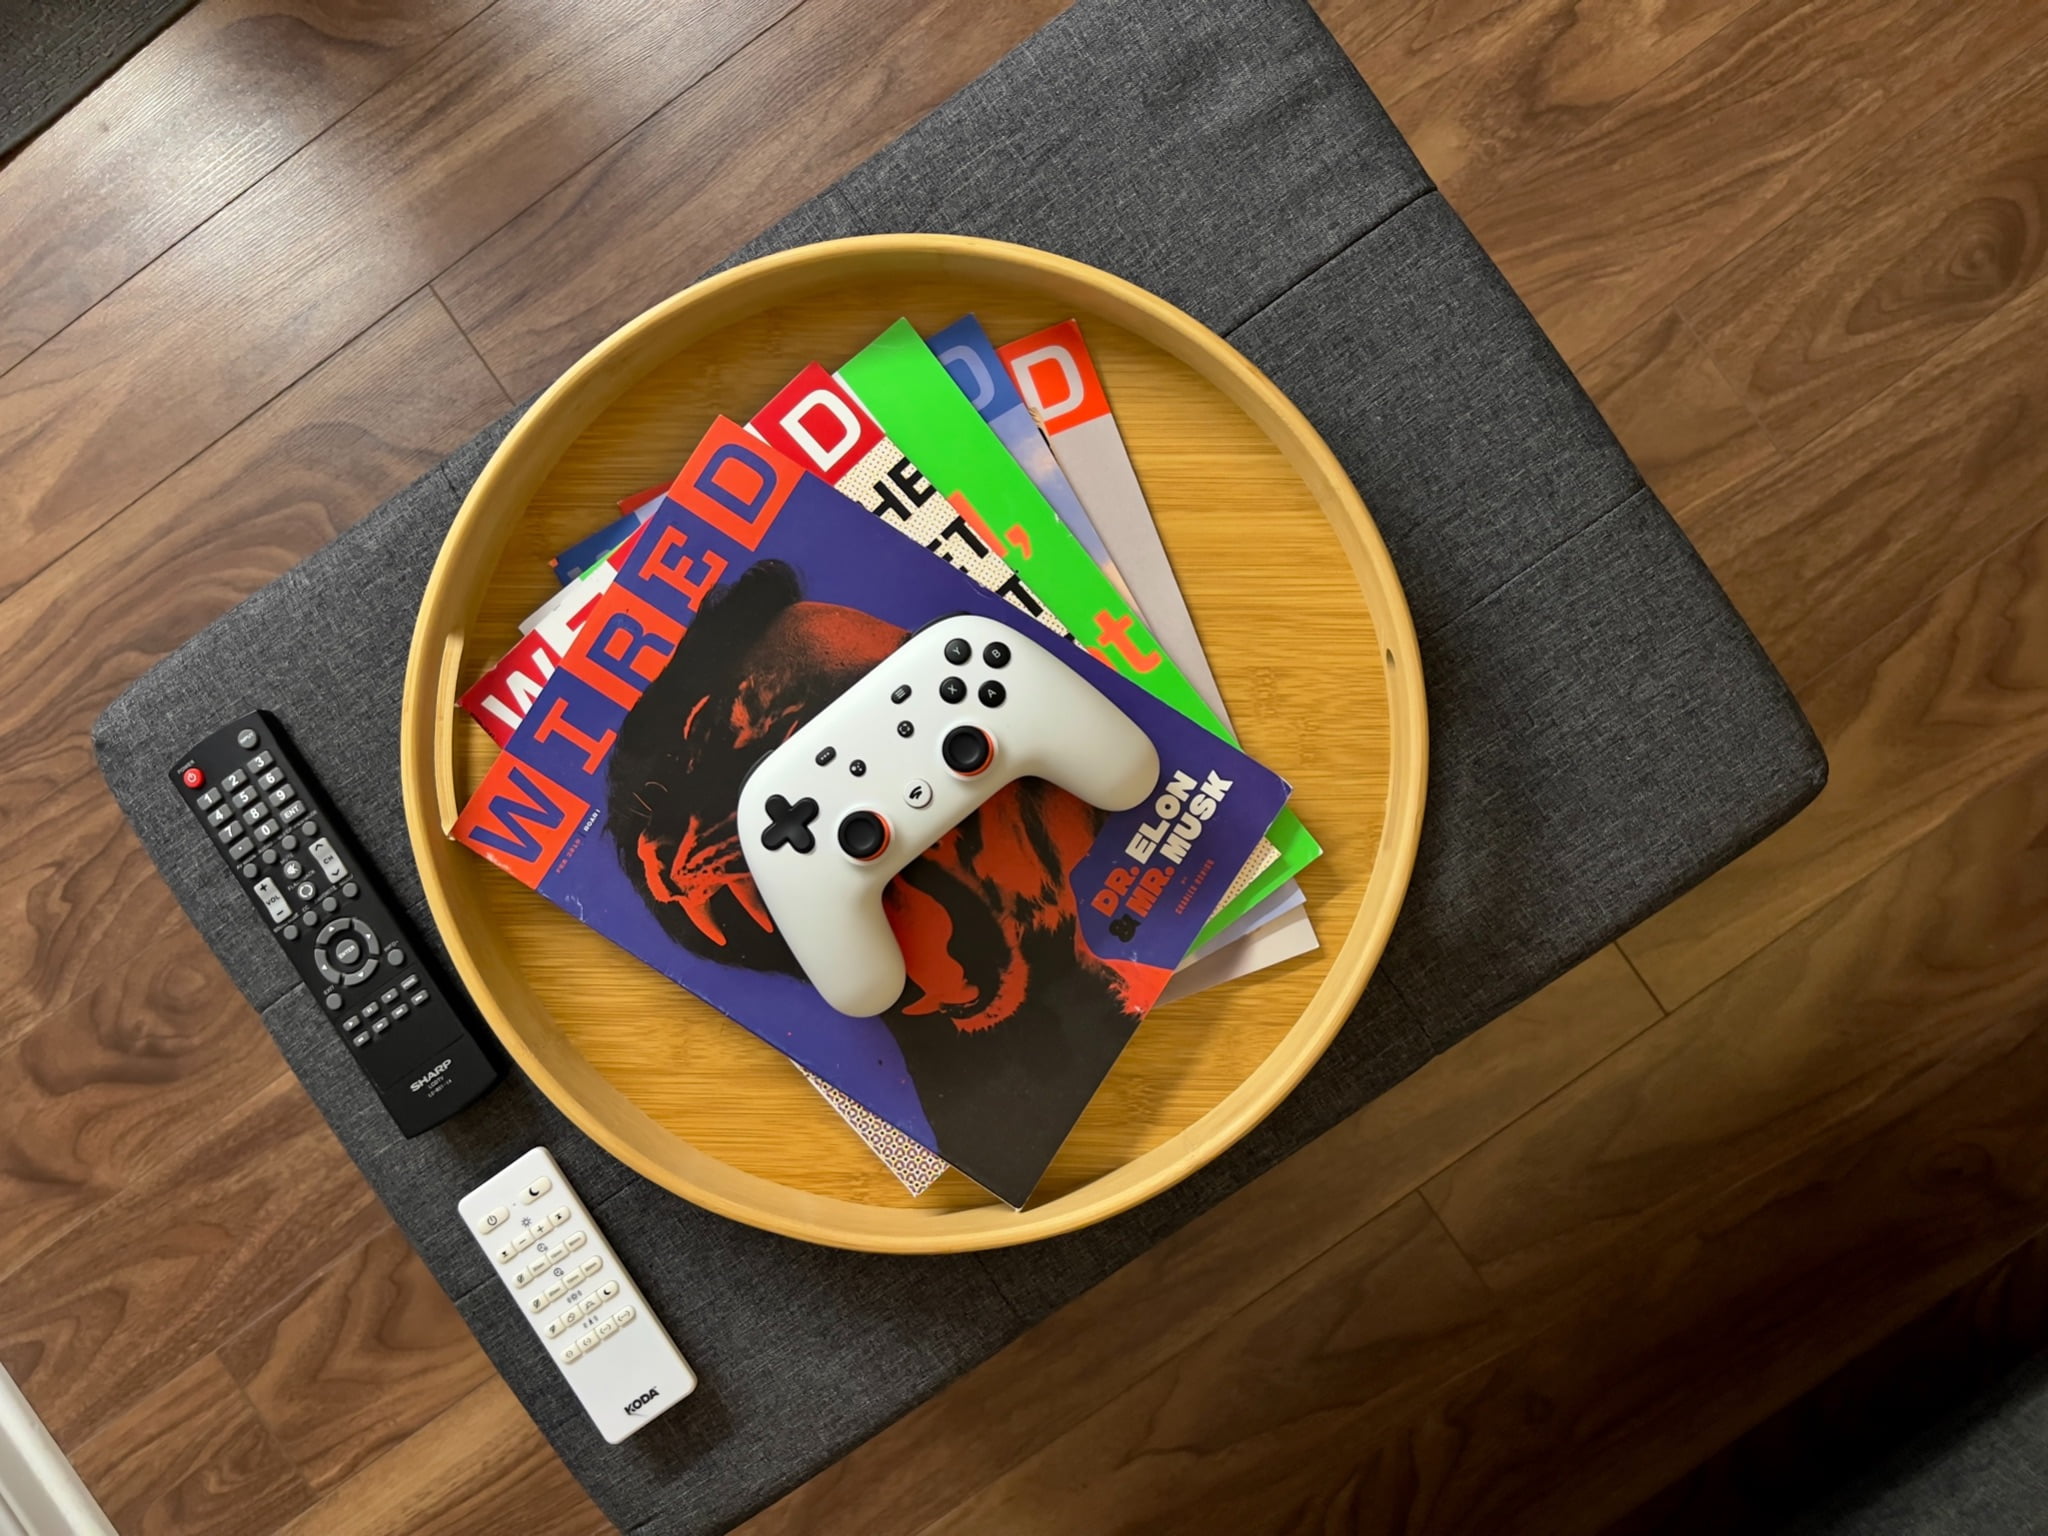 collection of gaming magazine under white controller